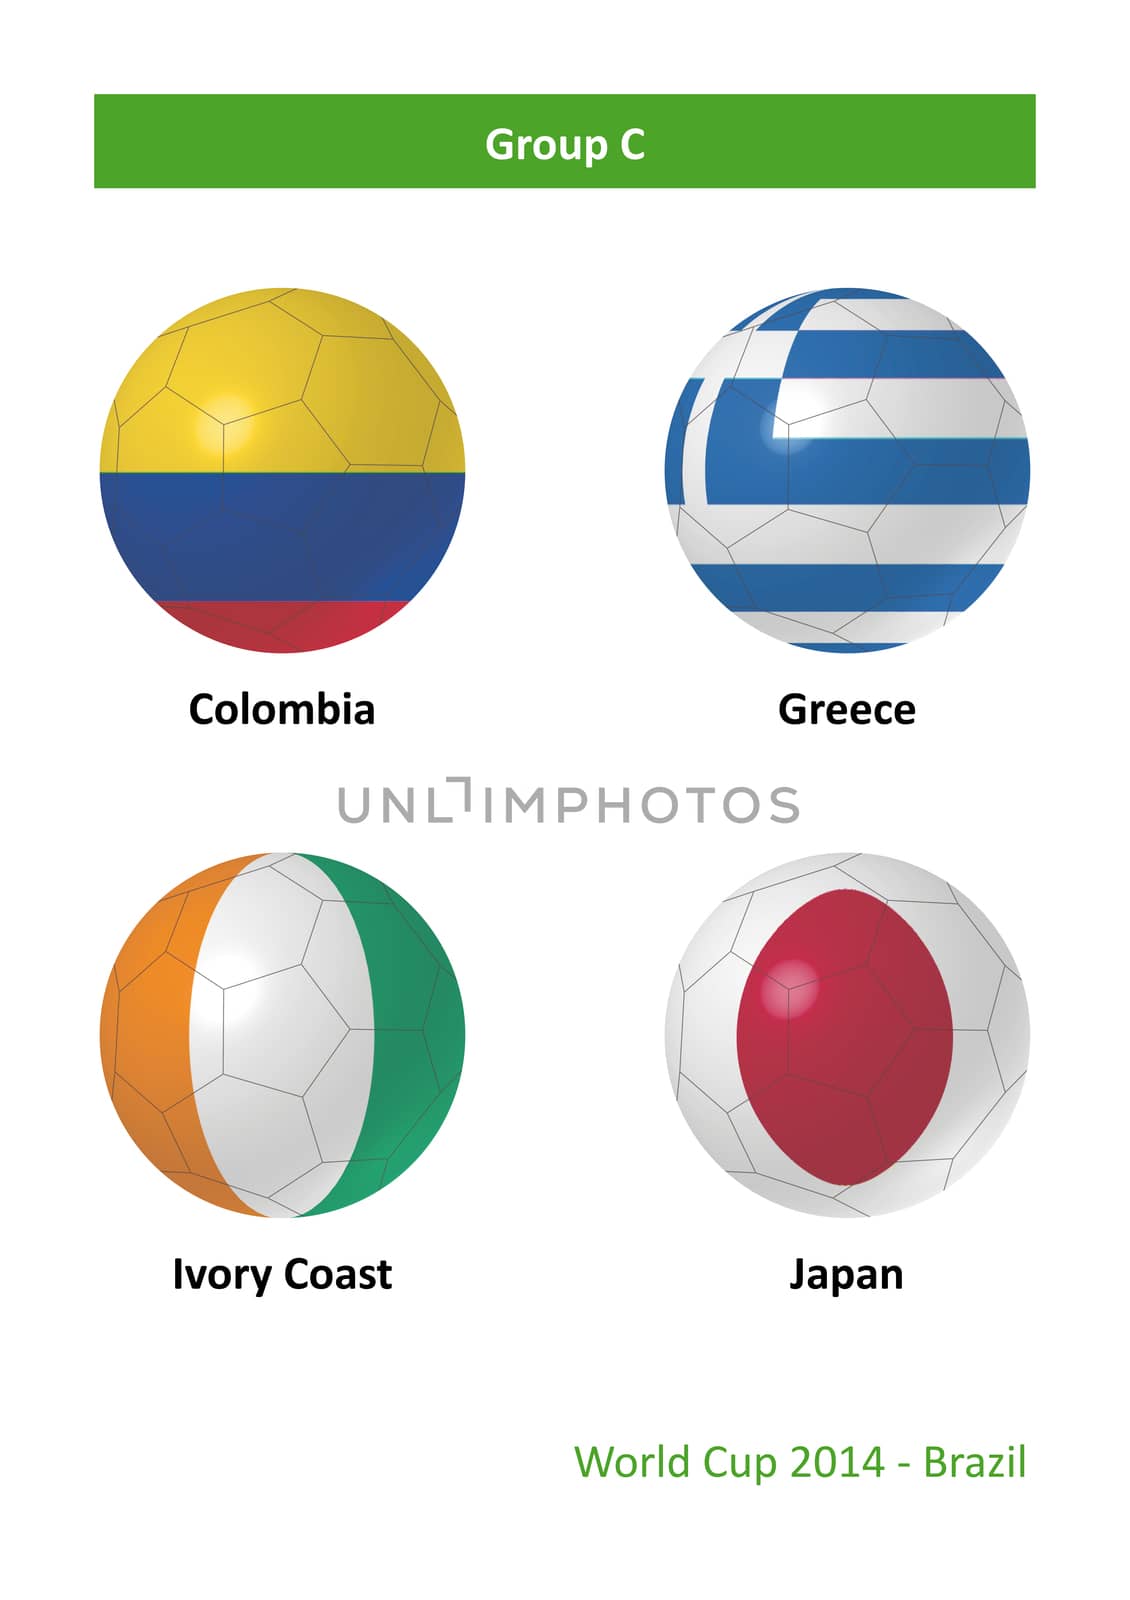 3D soccer balls with group C country flags World Cup Football Brazil 2014